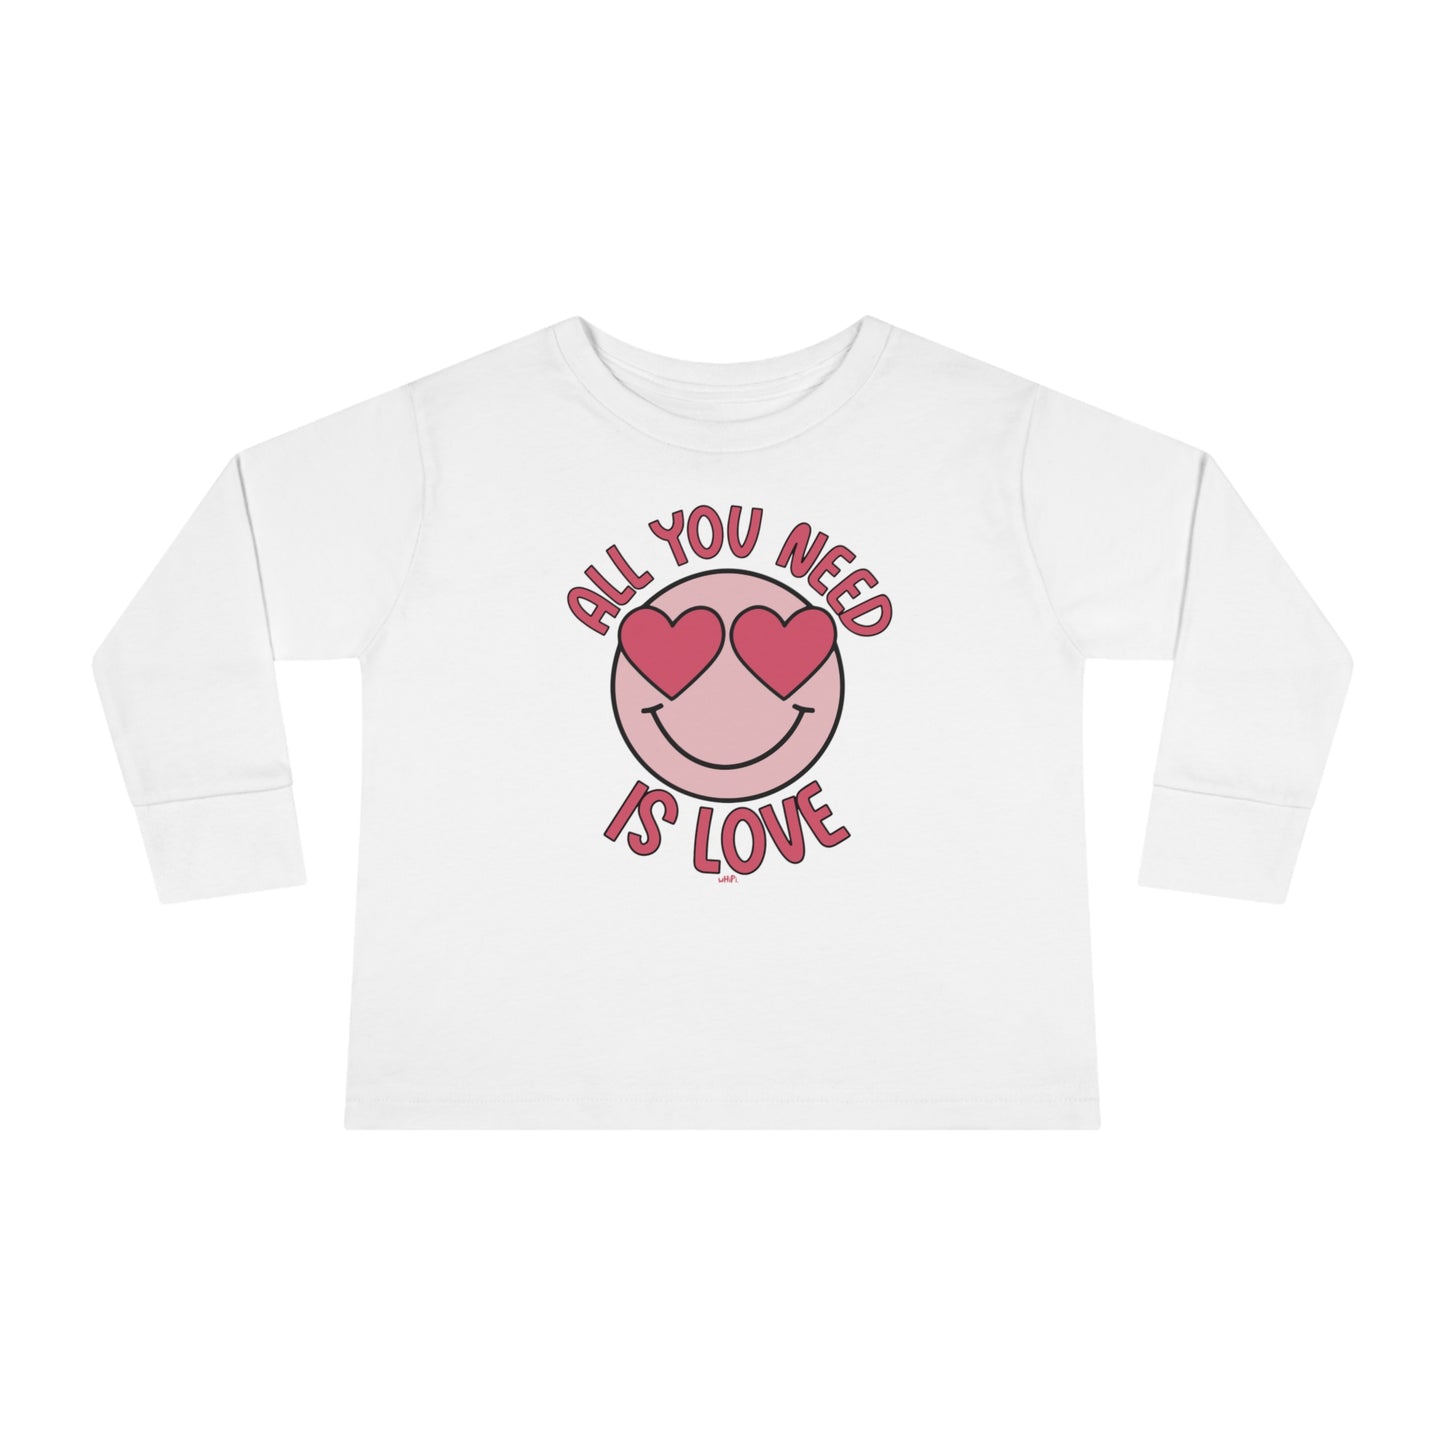 Toddler All You Need Is Love Long Sleeve Tee